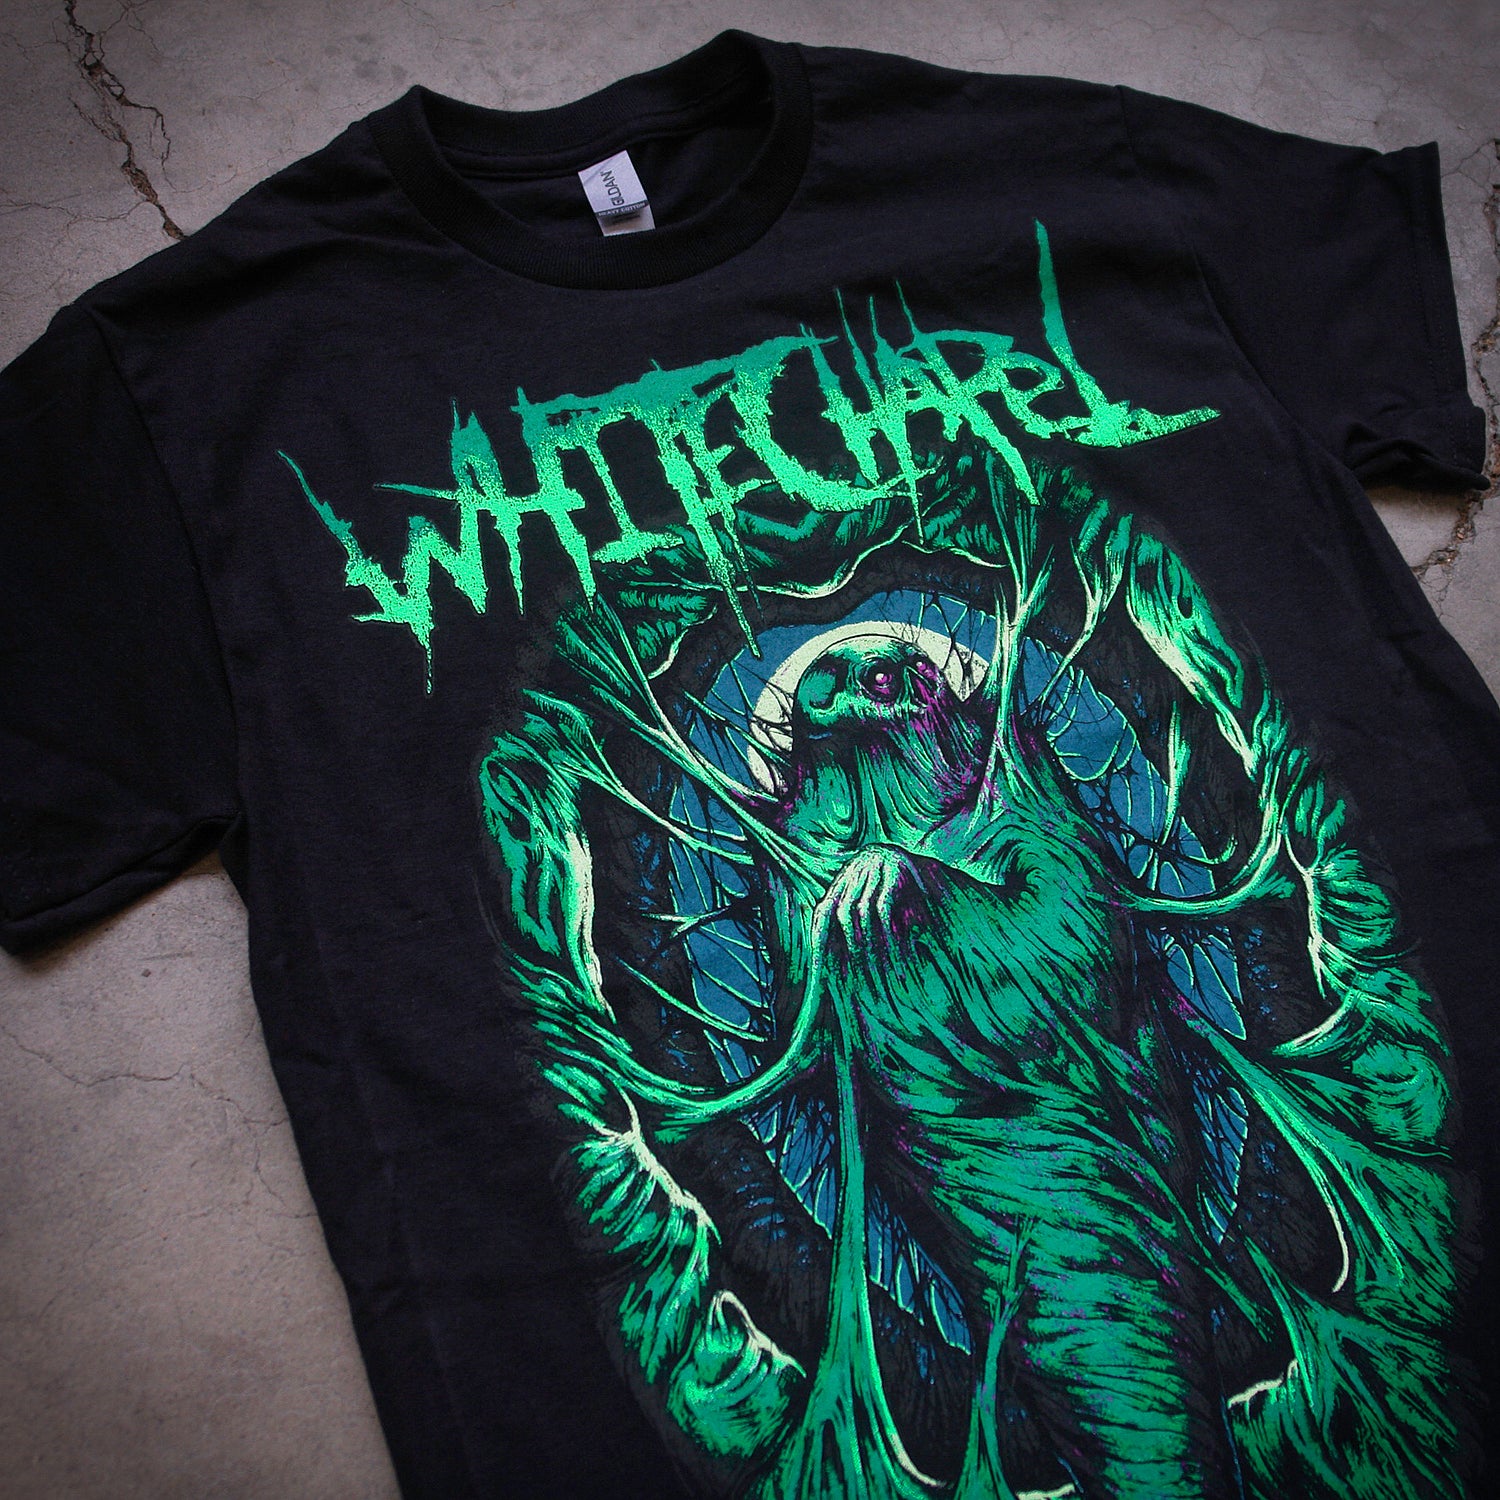 close up, angled image of a black tee shirt laid flat on a cracked concrete floor. tee has full body print of a green cocoon with a skeleton inside. at the top says whitechapel